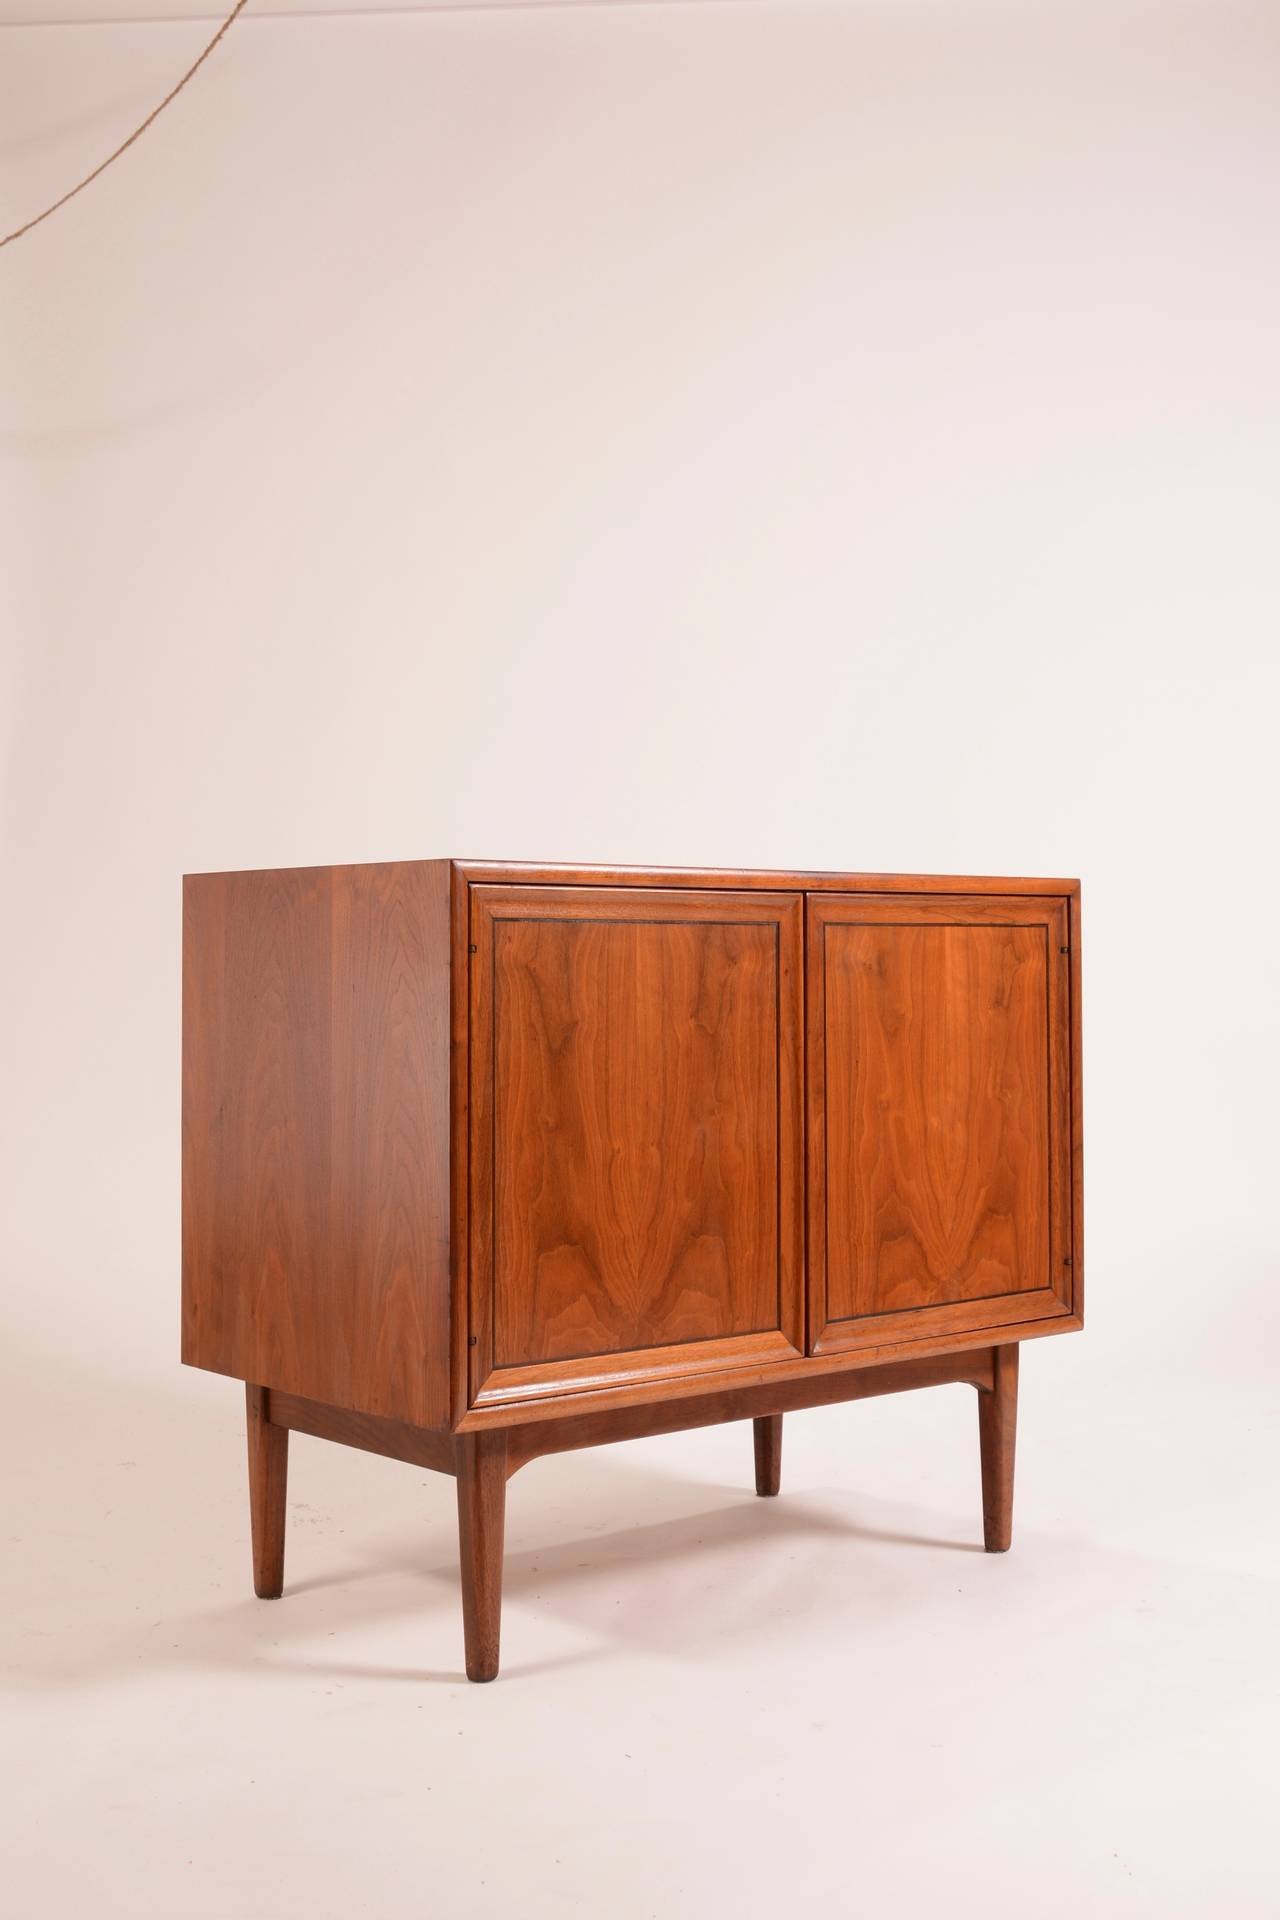 This is a beautiful walnut mid century modern credenza designed by Kipp Stewart and Stewart Macdougall for the Drexel Declaration line. This piece has its original finish and is in good condition with age appropriate wear.